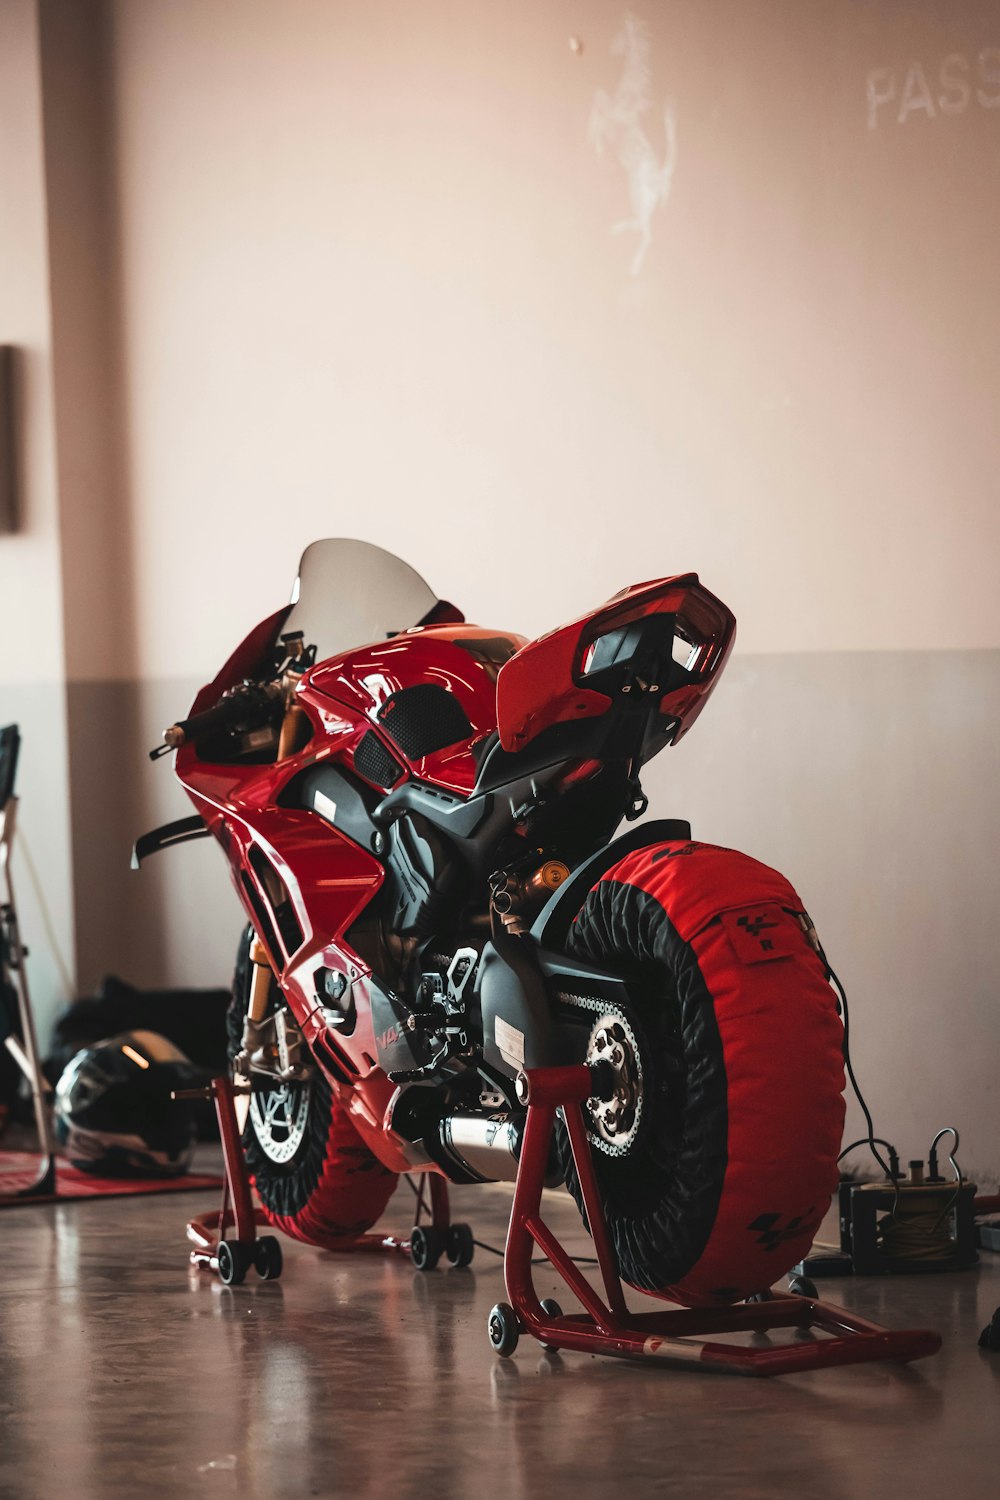 a red motorcycle is parked in a room